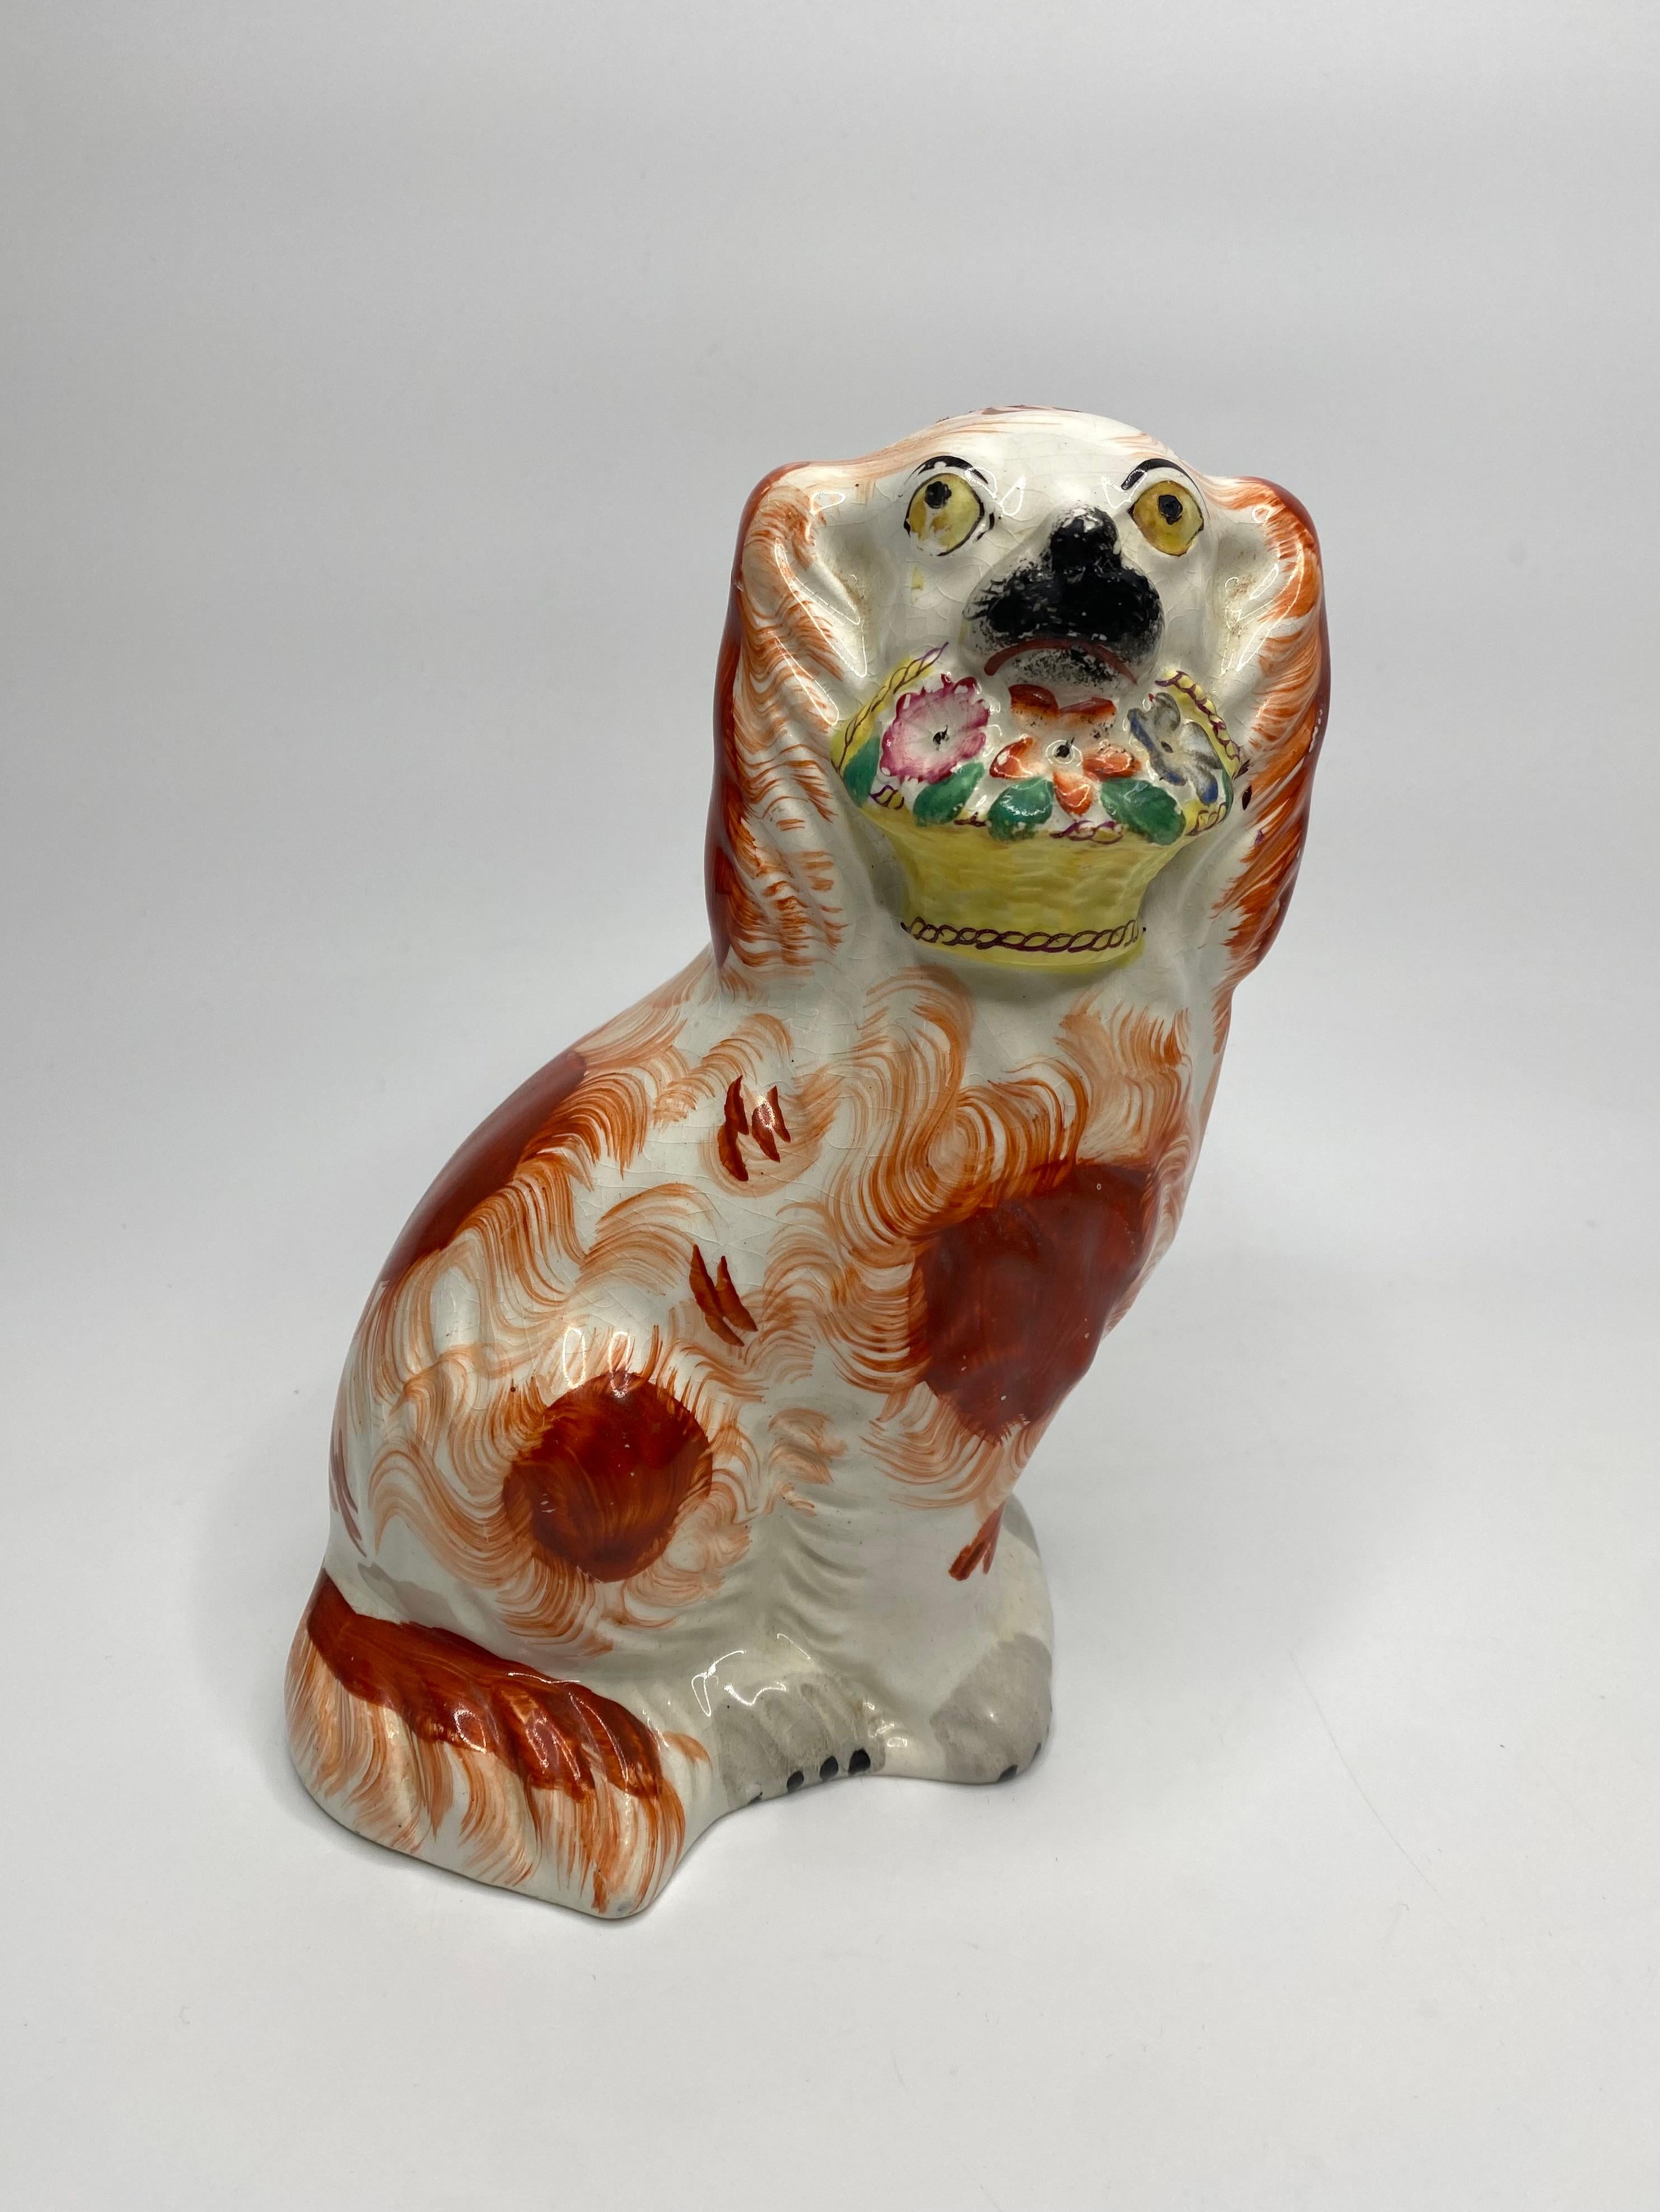 Pair of Staffordshire pottery ‘Basket of Flowers’ Spaniels, c. 1860. Both dogs painted with yellow eyes, and having large liver red spots to their bodies. They carry large, yellow baskets of flowers in their mouths.
Height – 19.5 cm, 7 5/8”.
Width –